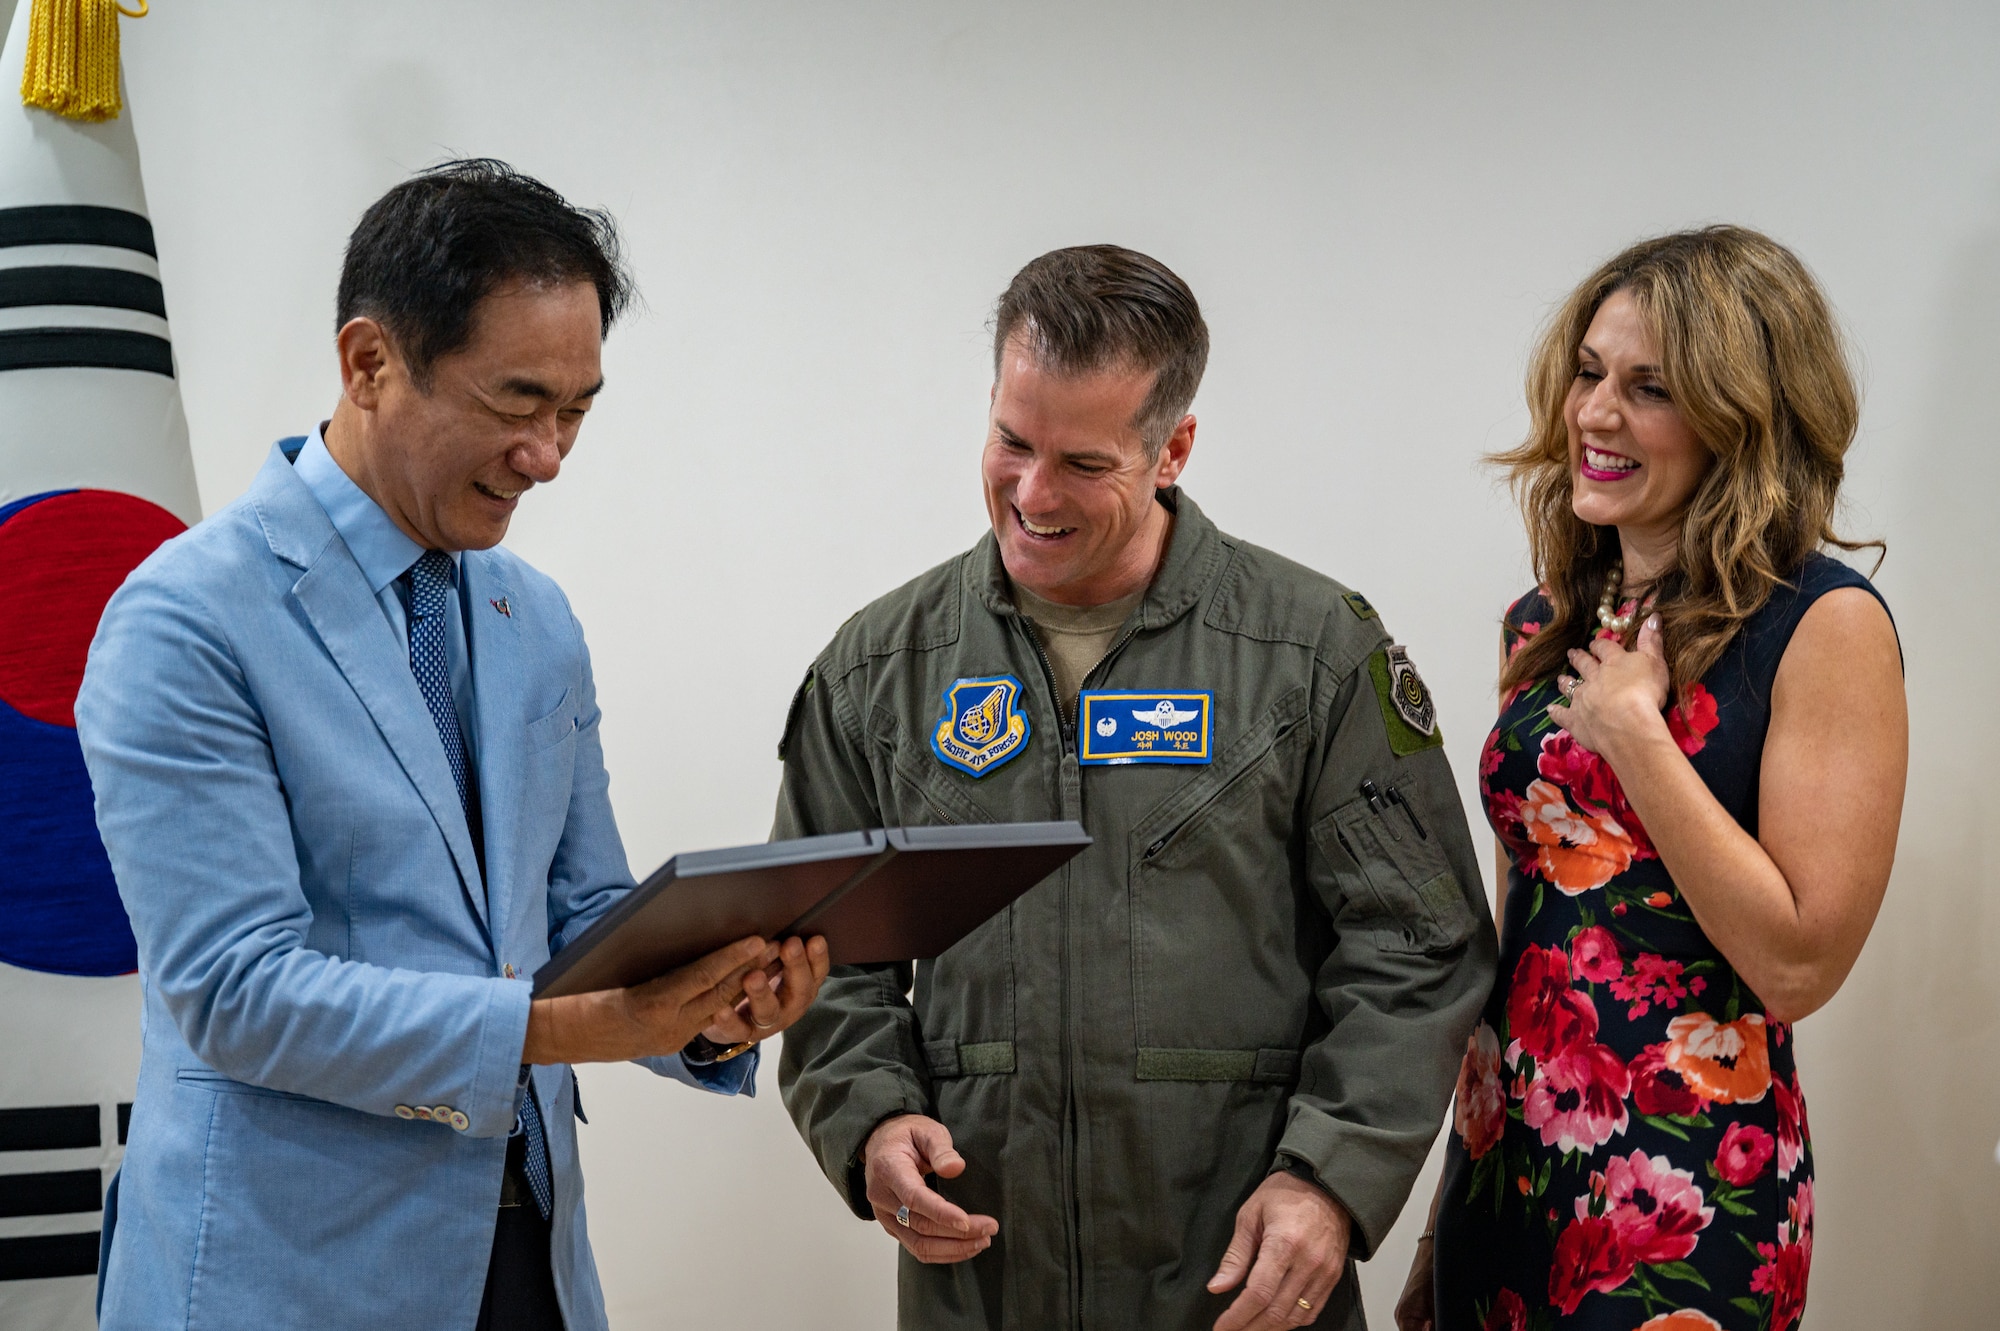 Mr. Jung, Jang Seon, left, Pyeongtaek City mayor, presents U.S. Air Force Col. Joshua Wood, middle, 51st Fighter Wing Commander, and his wife, Mrs. Bonnie Wood, with a plaque of honorary citizenship at Pyeongtaek City Hall, Republic of Korea, June 1, 2023. Osan Air Base in Pyeongtaek city fosters strong relationships among representatives from military, police, government, and civil organizations in the region. (U.S. Air Force photo by Senior Airman Thomas Sjoberg)